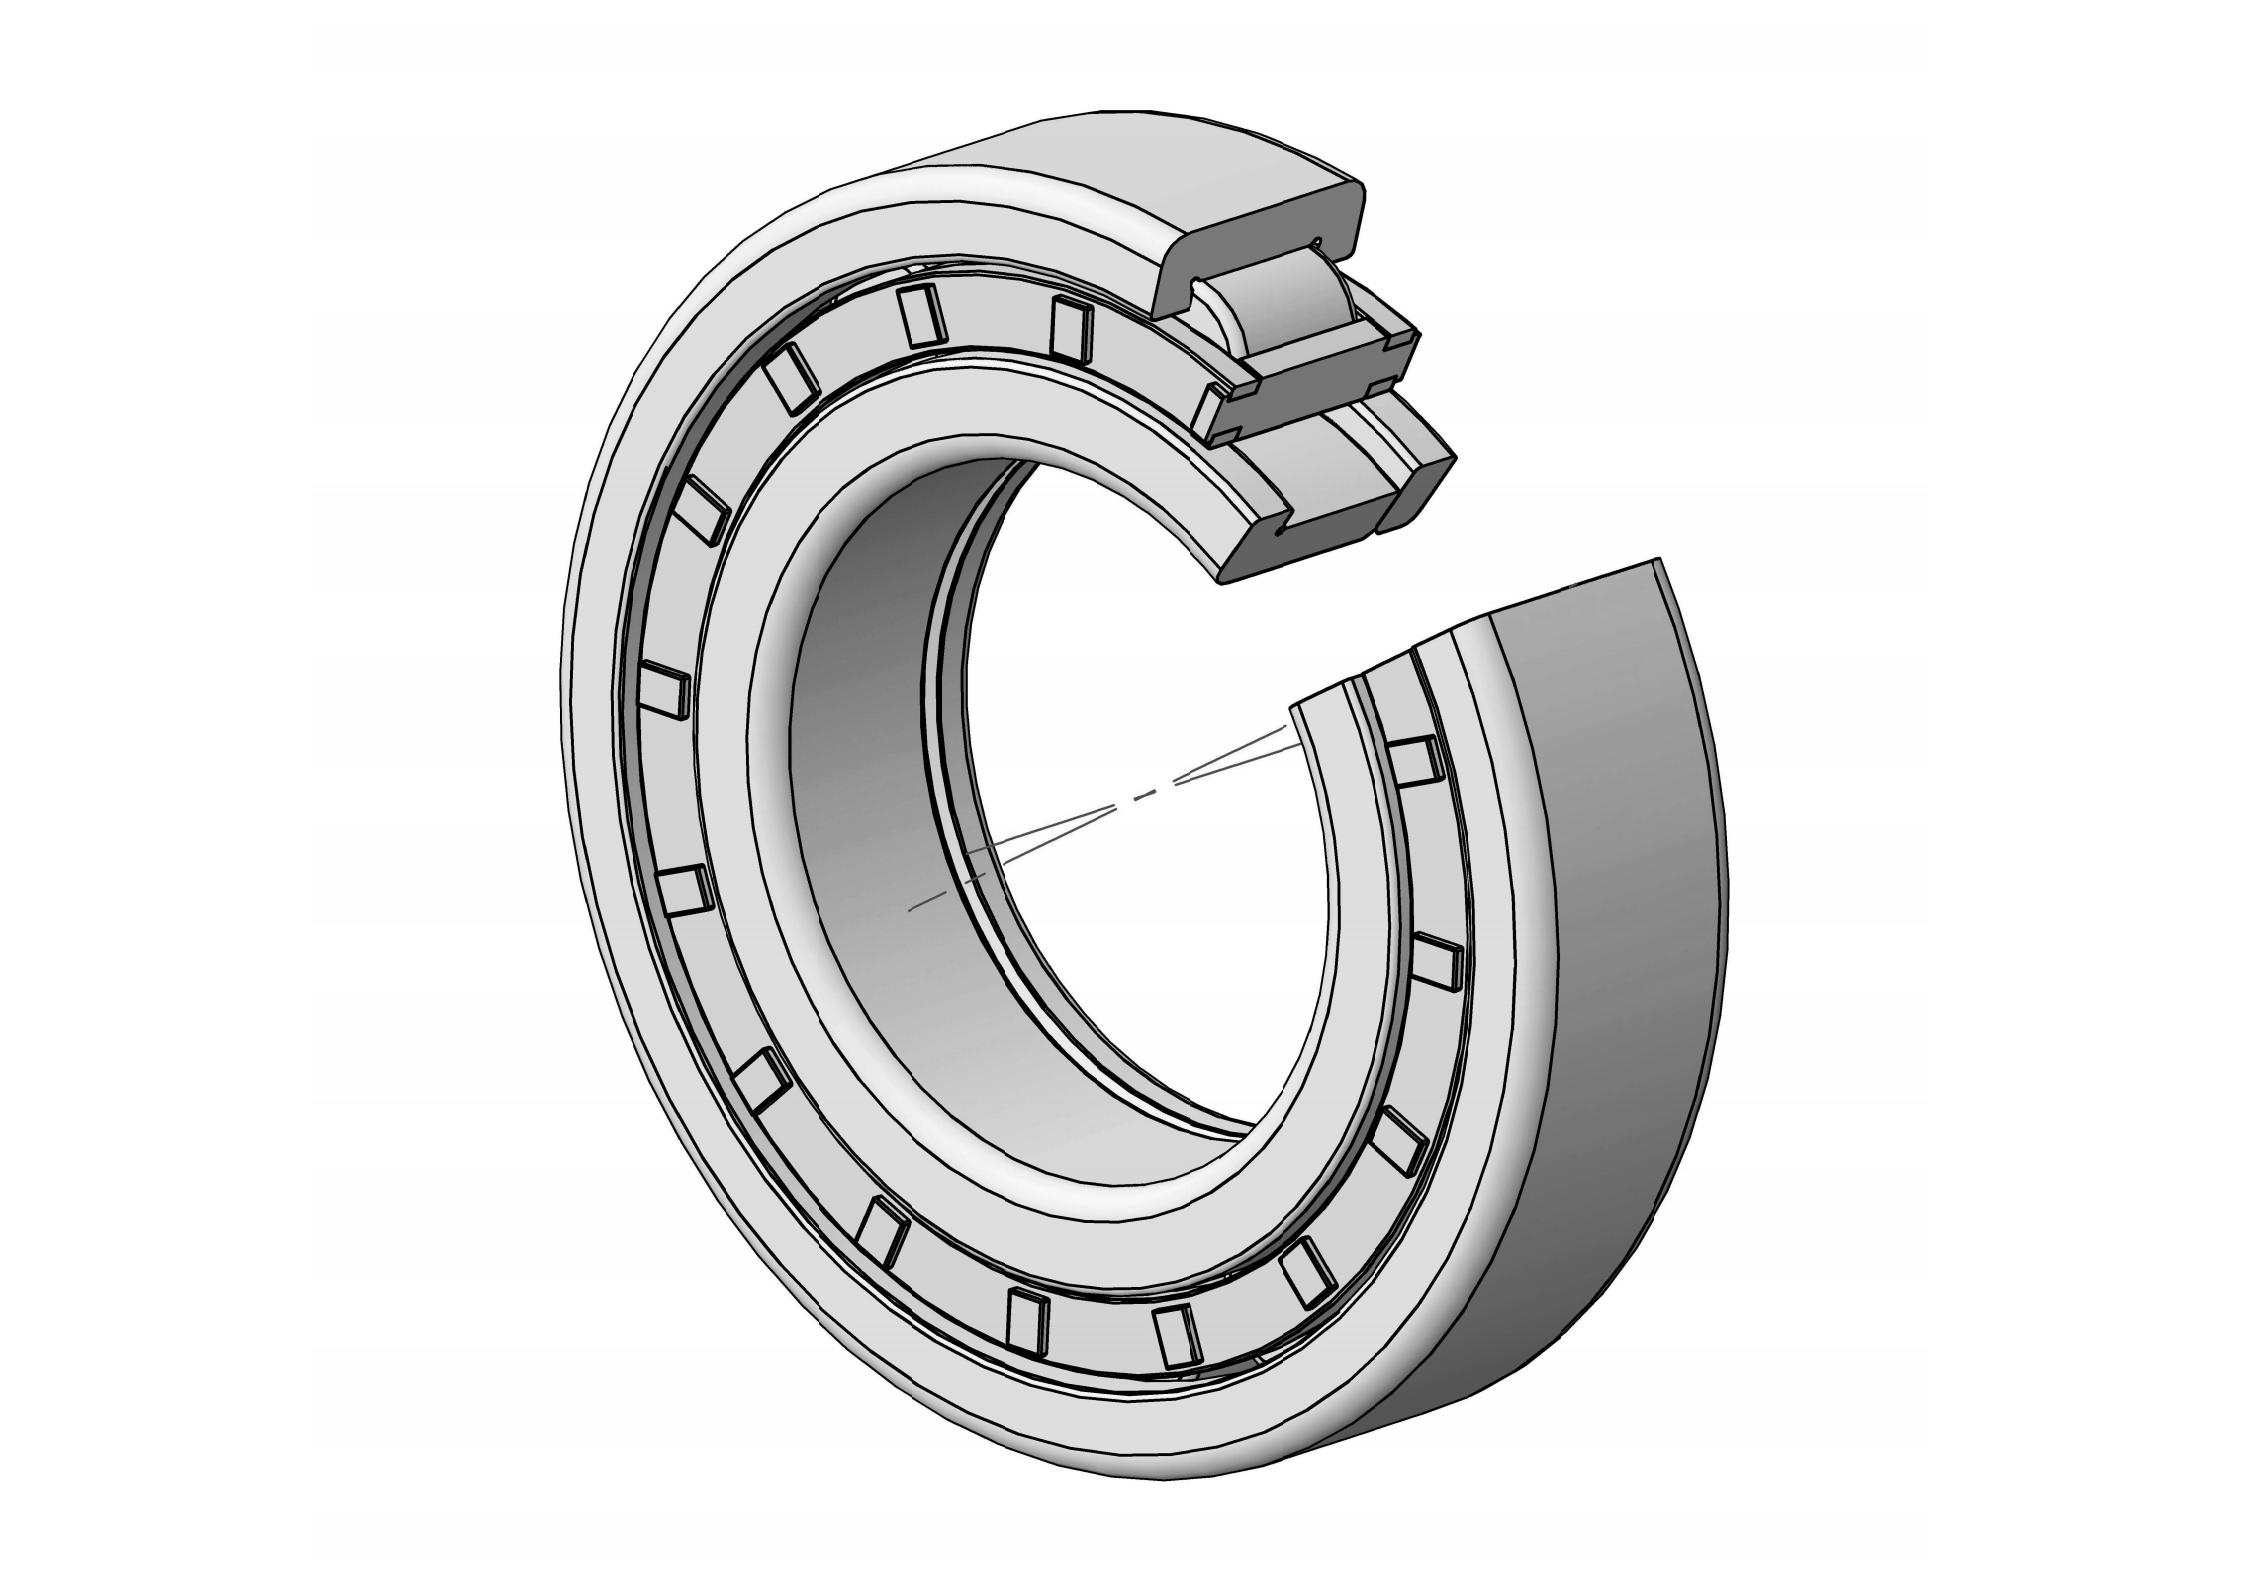 NUP221-EM Single Row Cylindrical roller bearing 